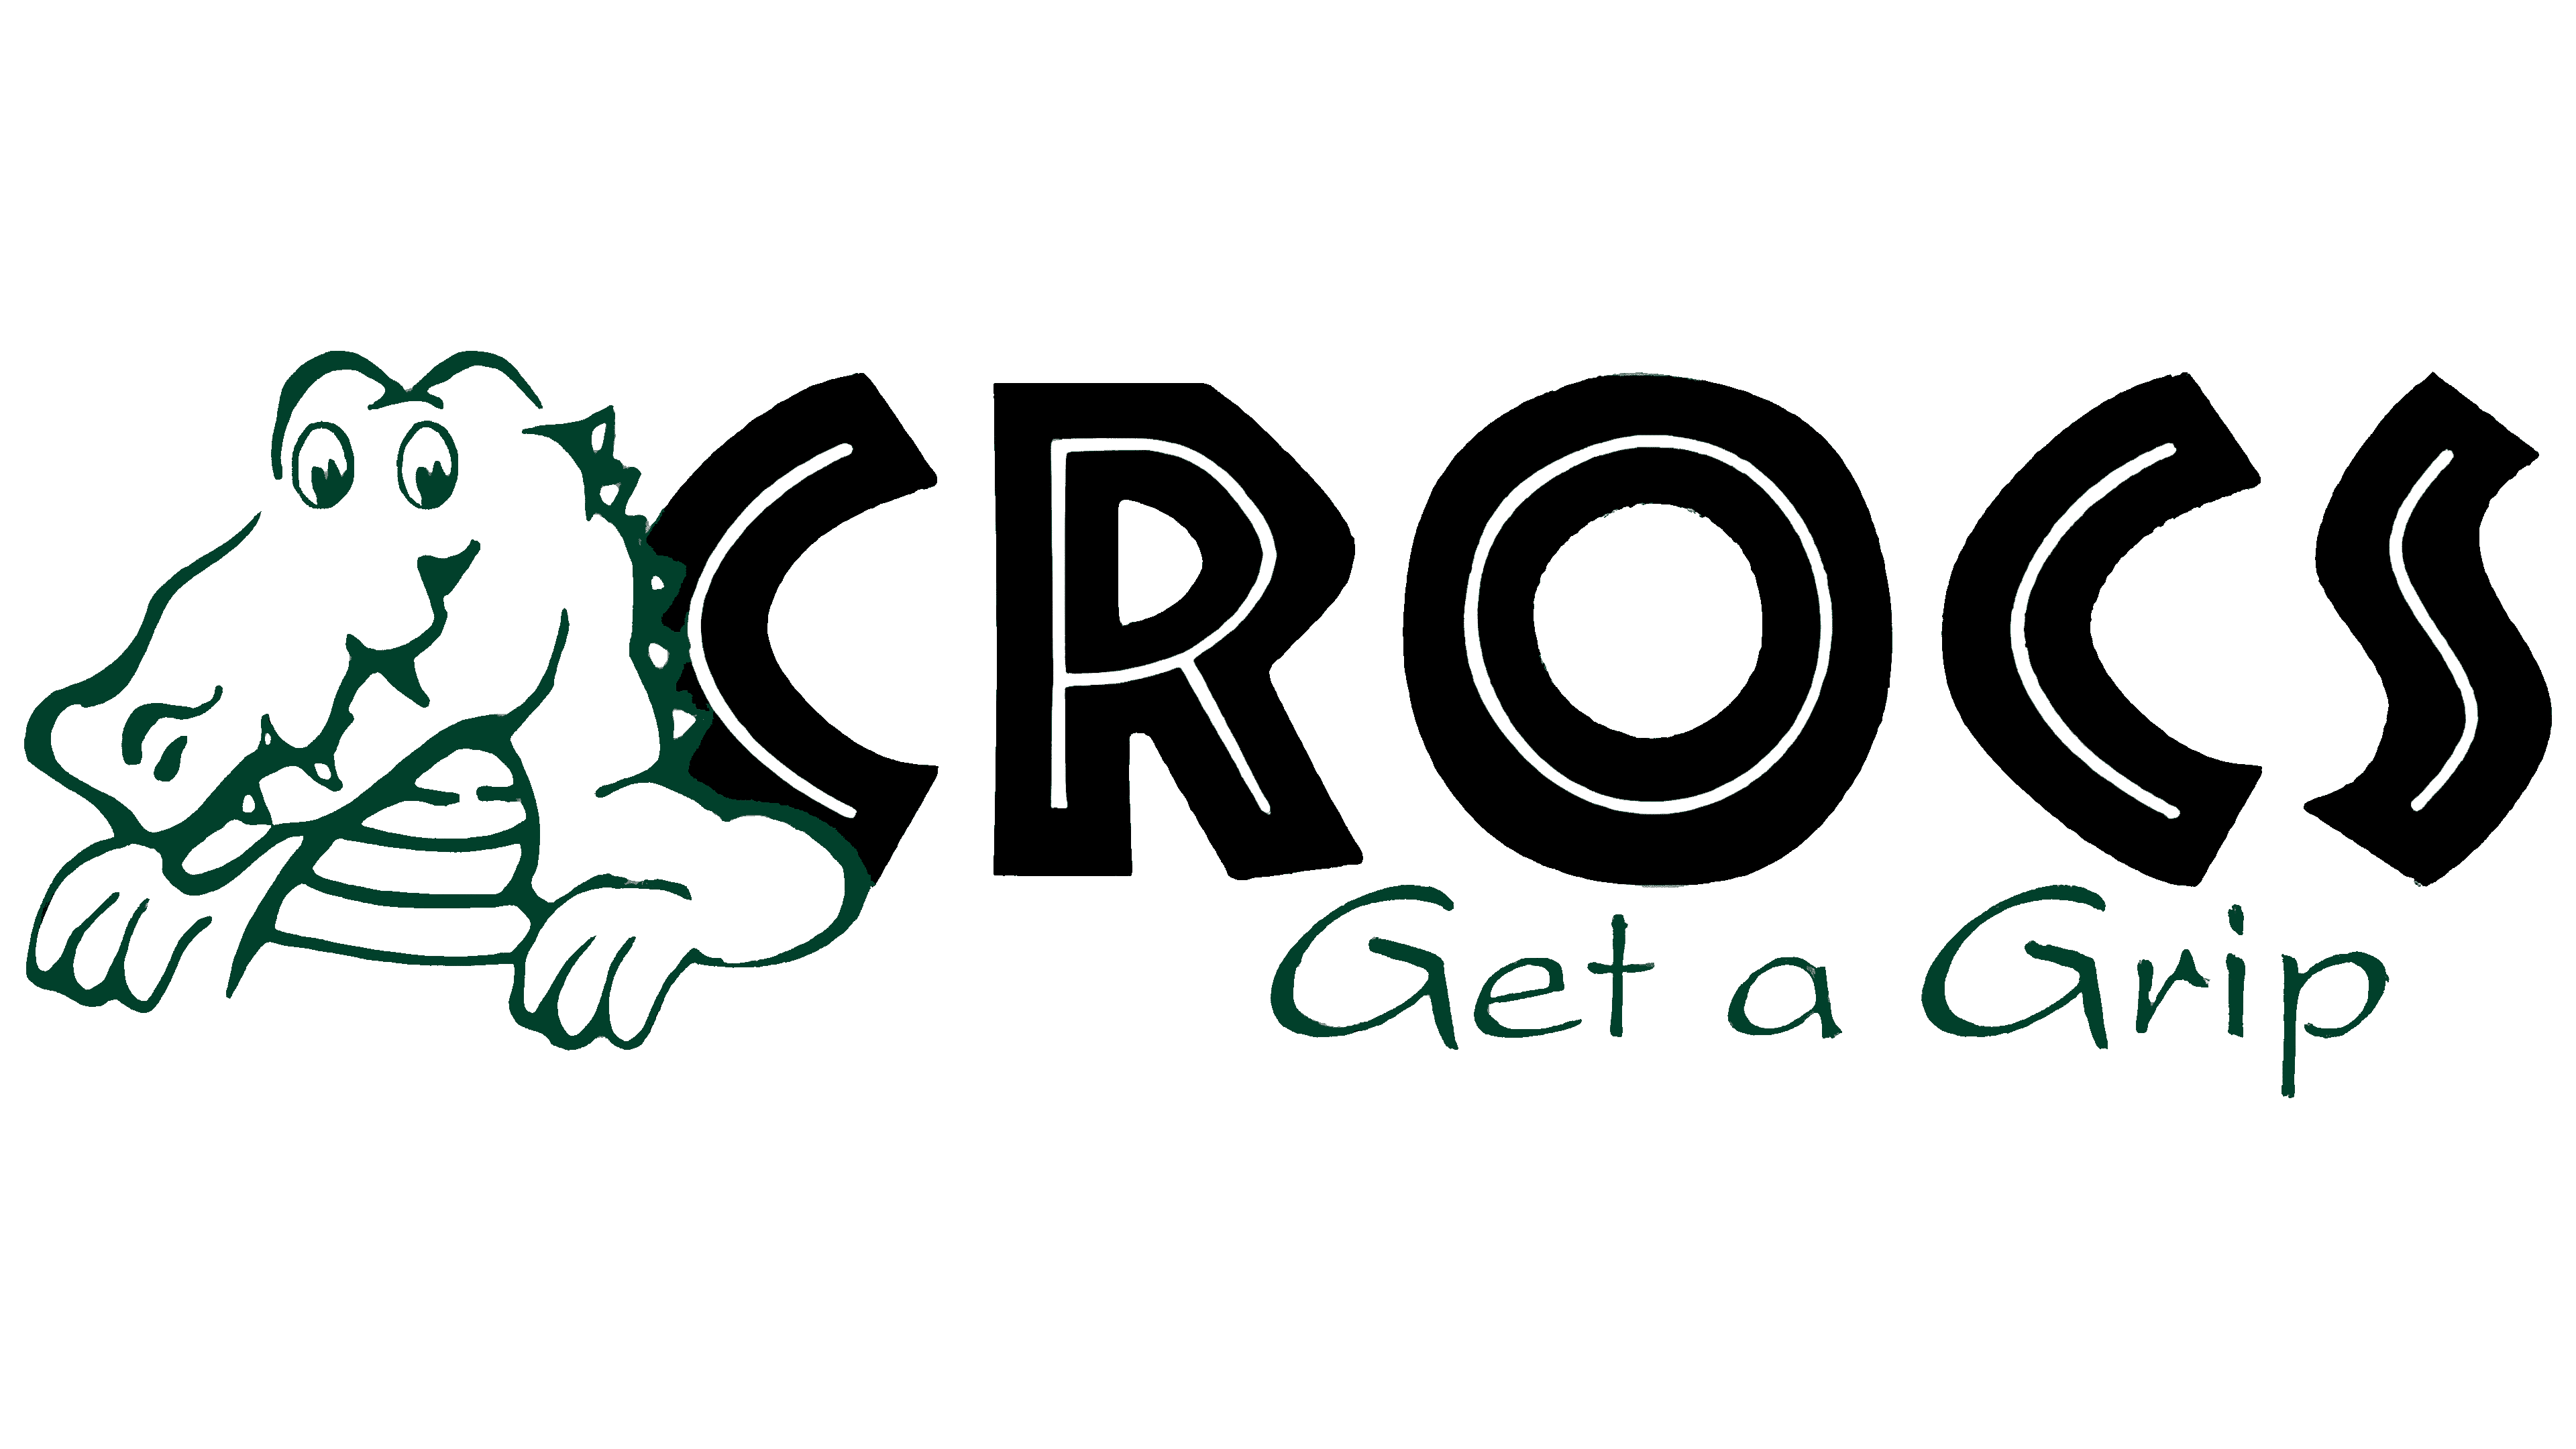 Crocs Logo, symbol, meaning, history, PNG, brand